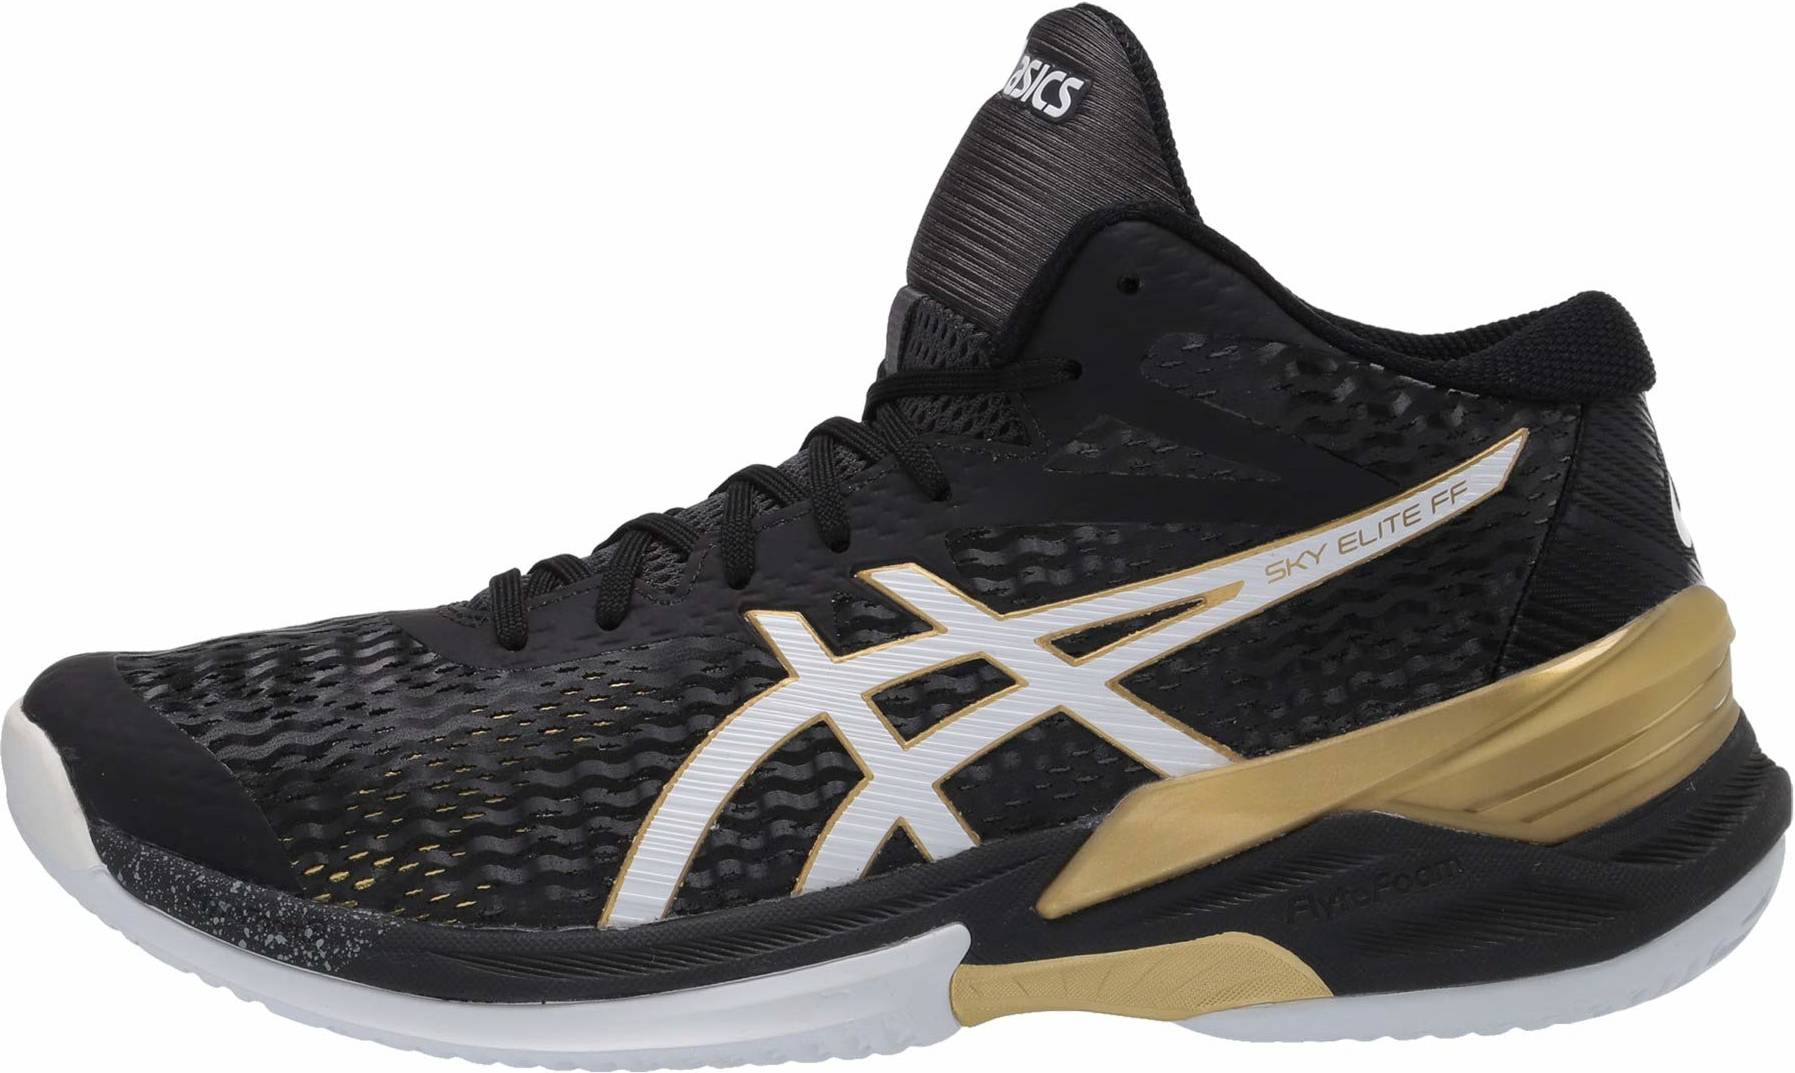 Save 35% on Asics Volleyball Shoes (19 